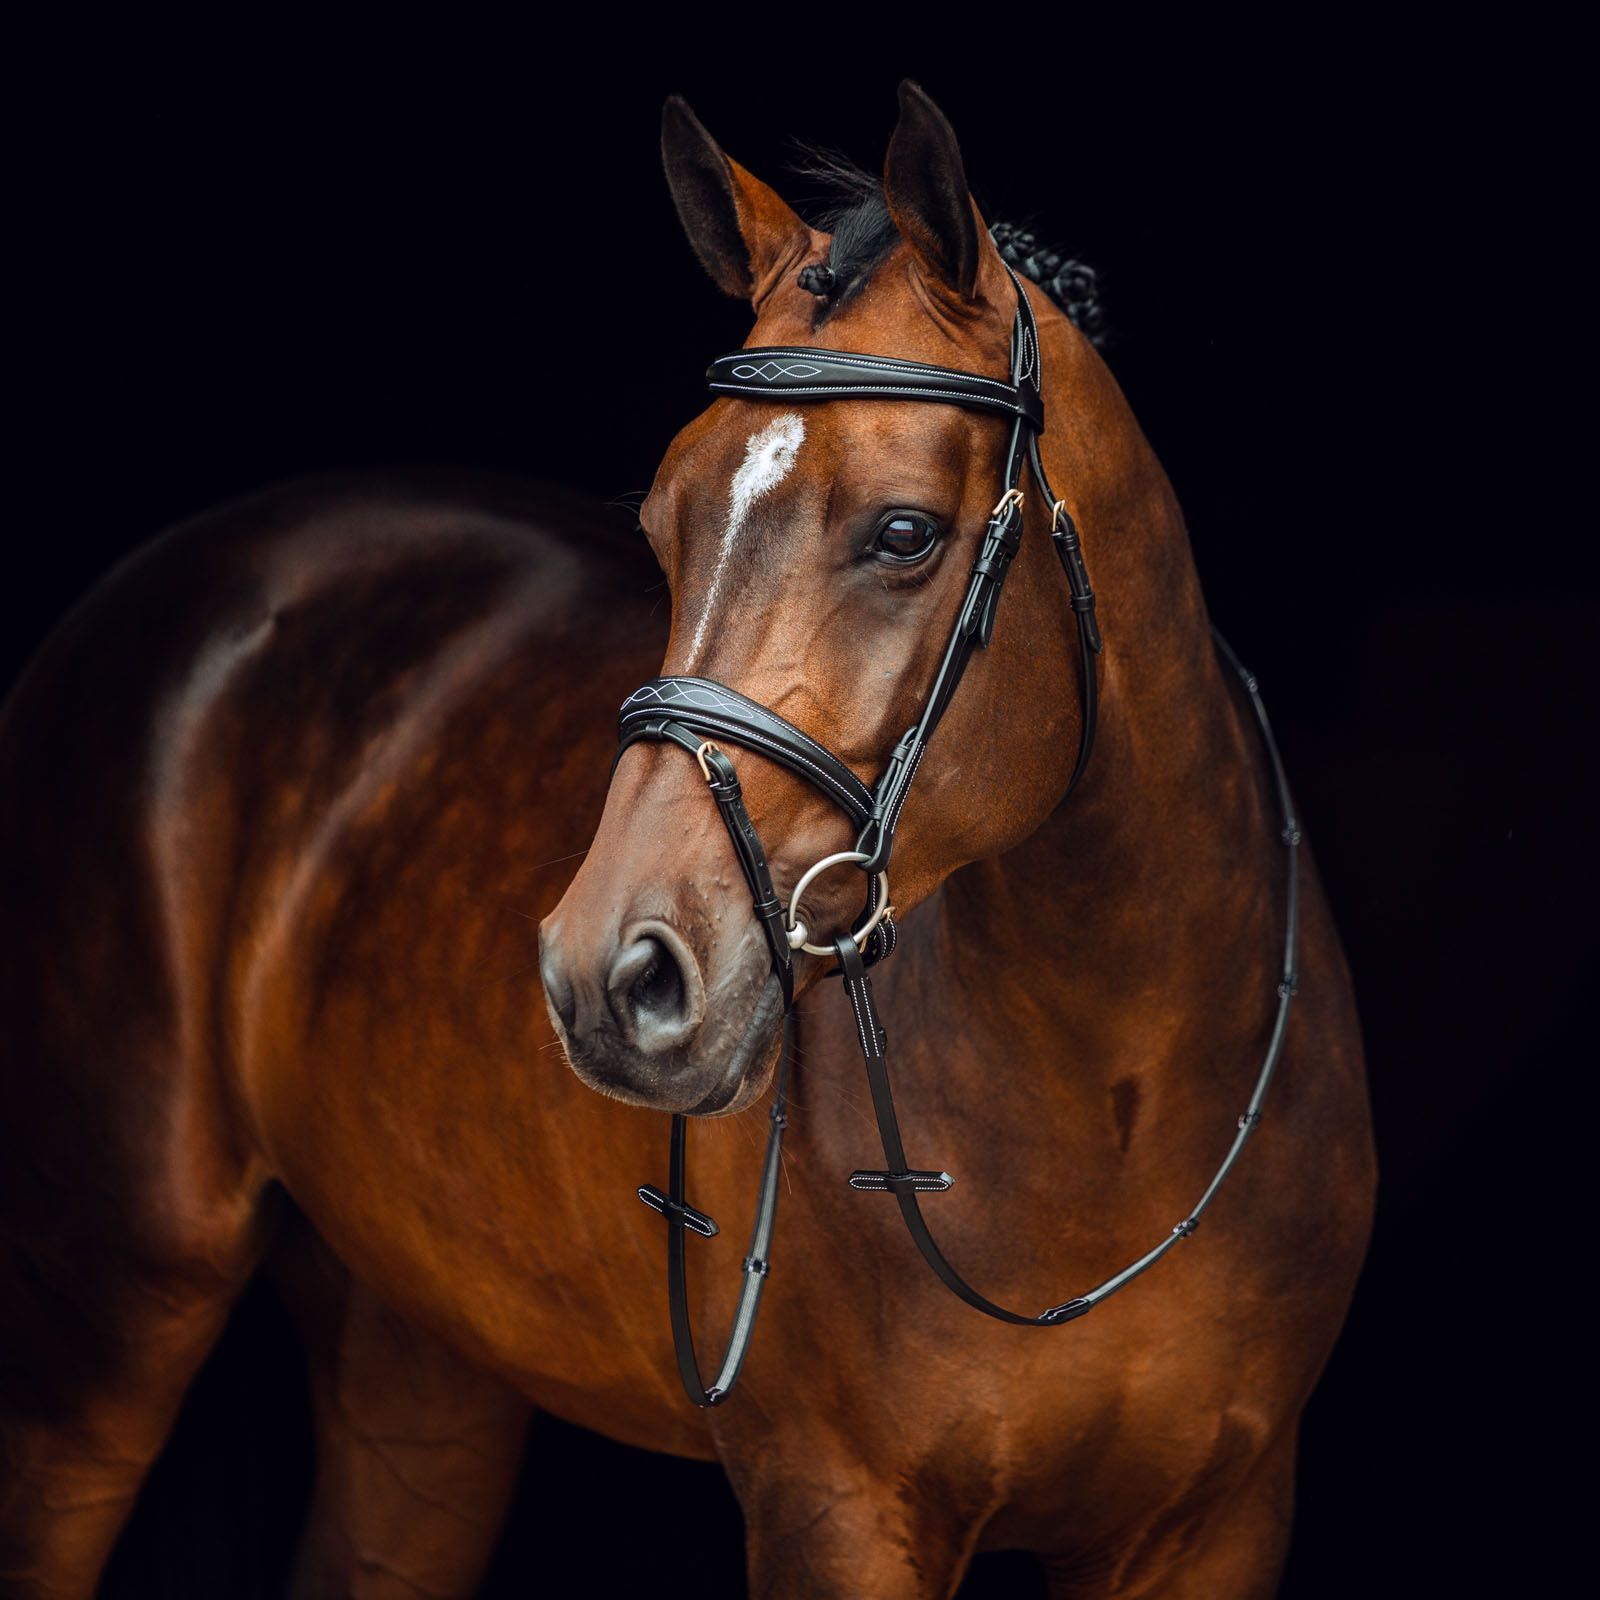 Details about   Horze brand horse size BLACK LEATHER BITLESS BRIDLE w/ browband noseband reins 